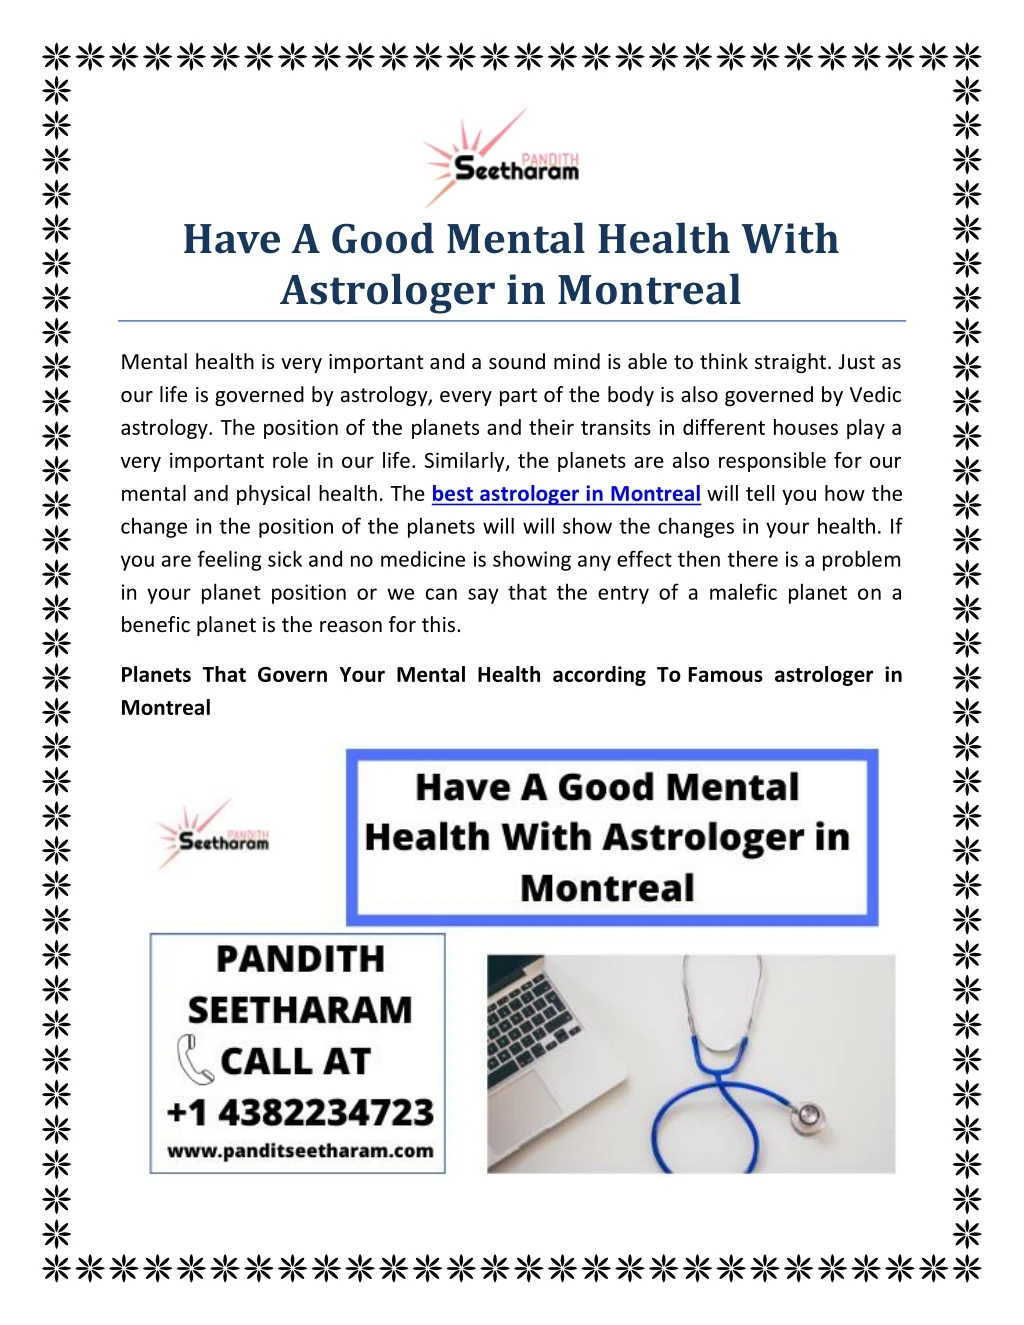 have a good mental health with astrologer